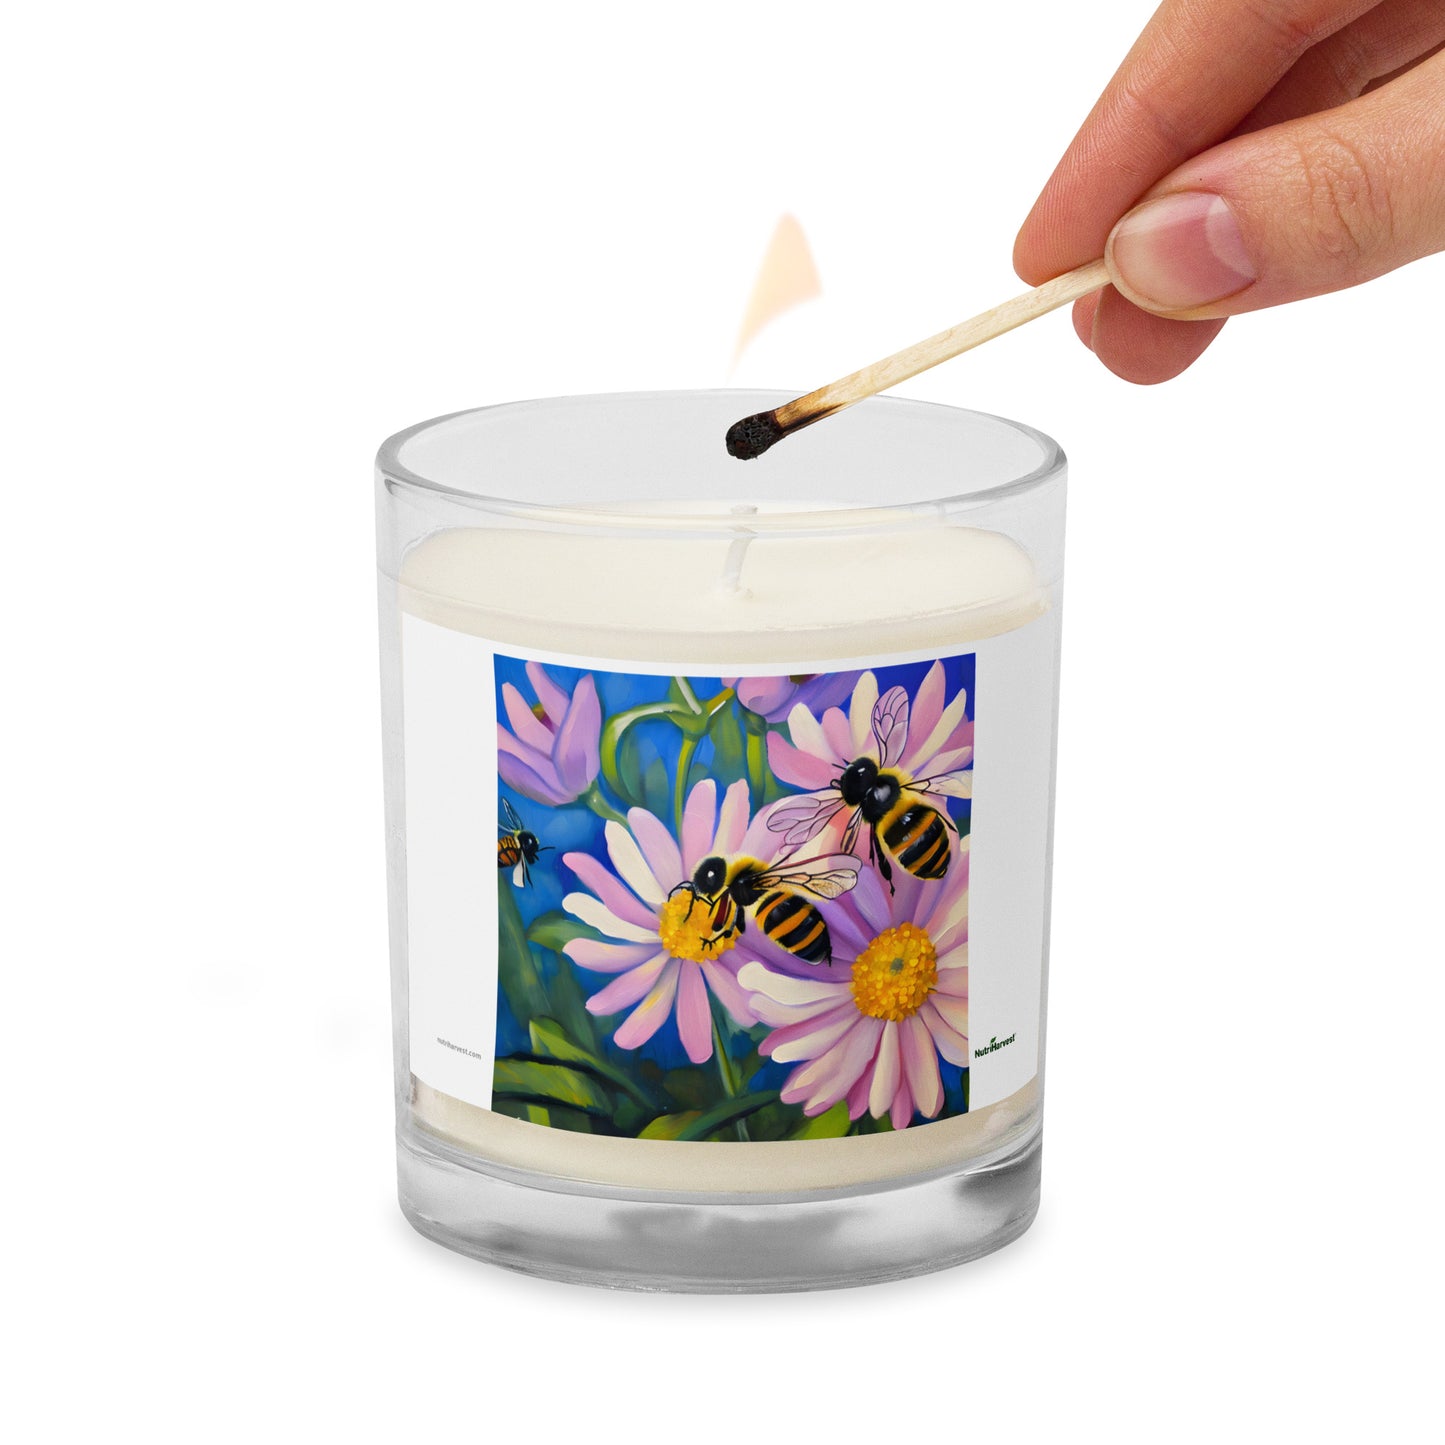 Beautiful Glass Jar Soy Wax Candle with Bees and Flowers Art